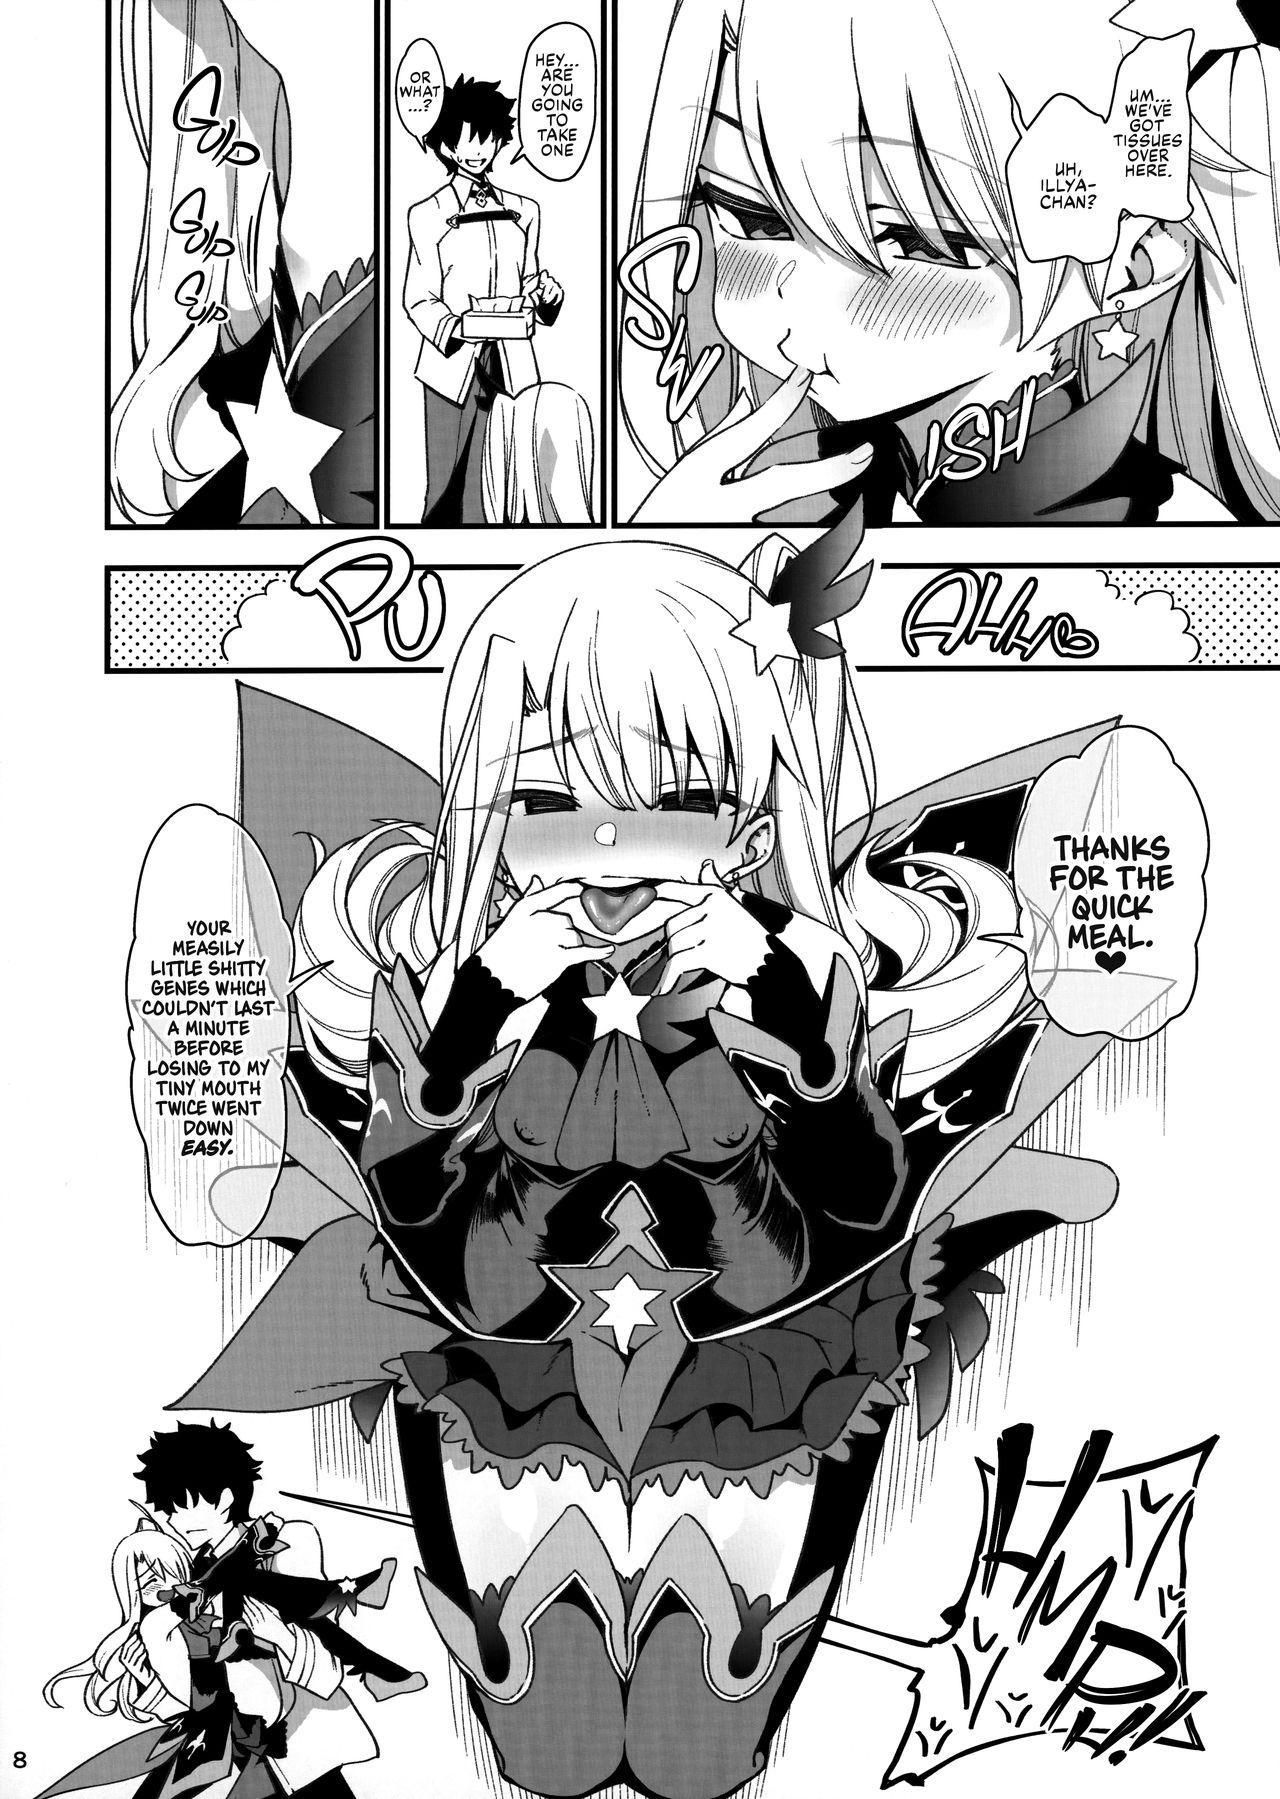 T Girl Mesugaki Testament Form-chan o Wakarasetai | That Slutty Little Testament Form Brat! I Want to Teach Her a Lesson! - Fate grand order Inked - Page 9